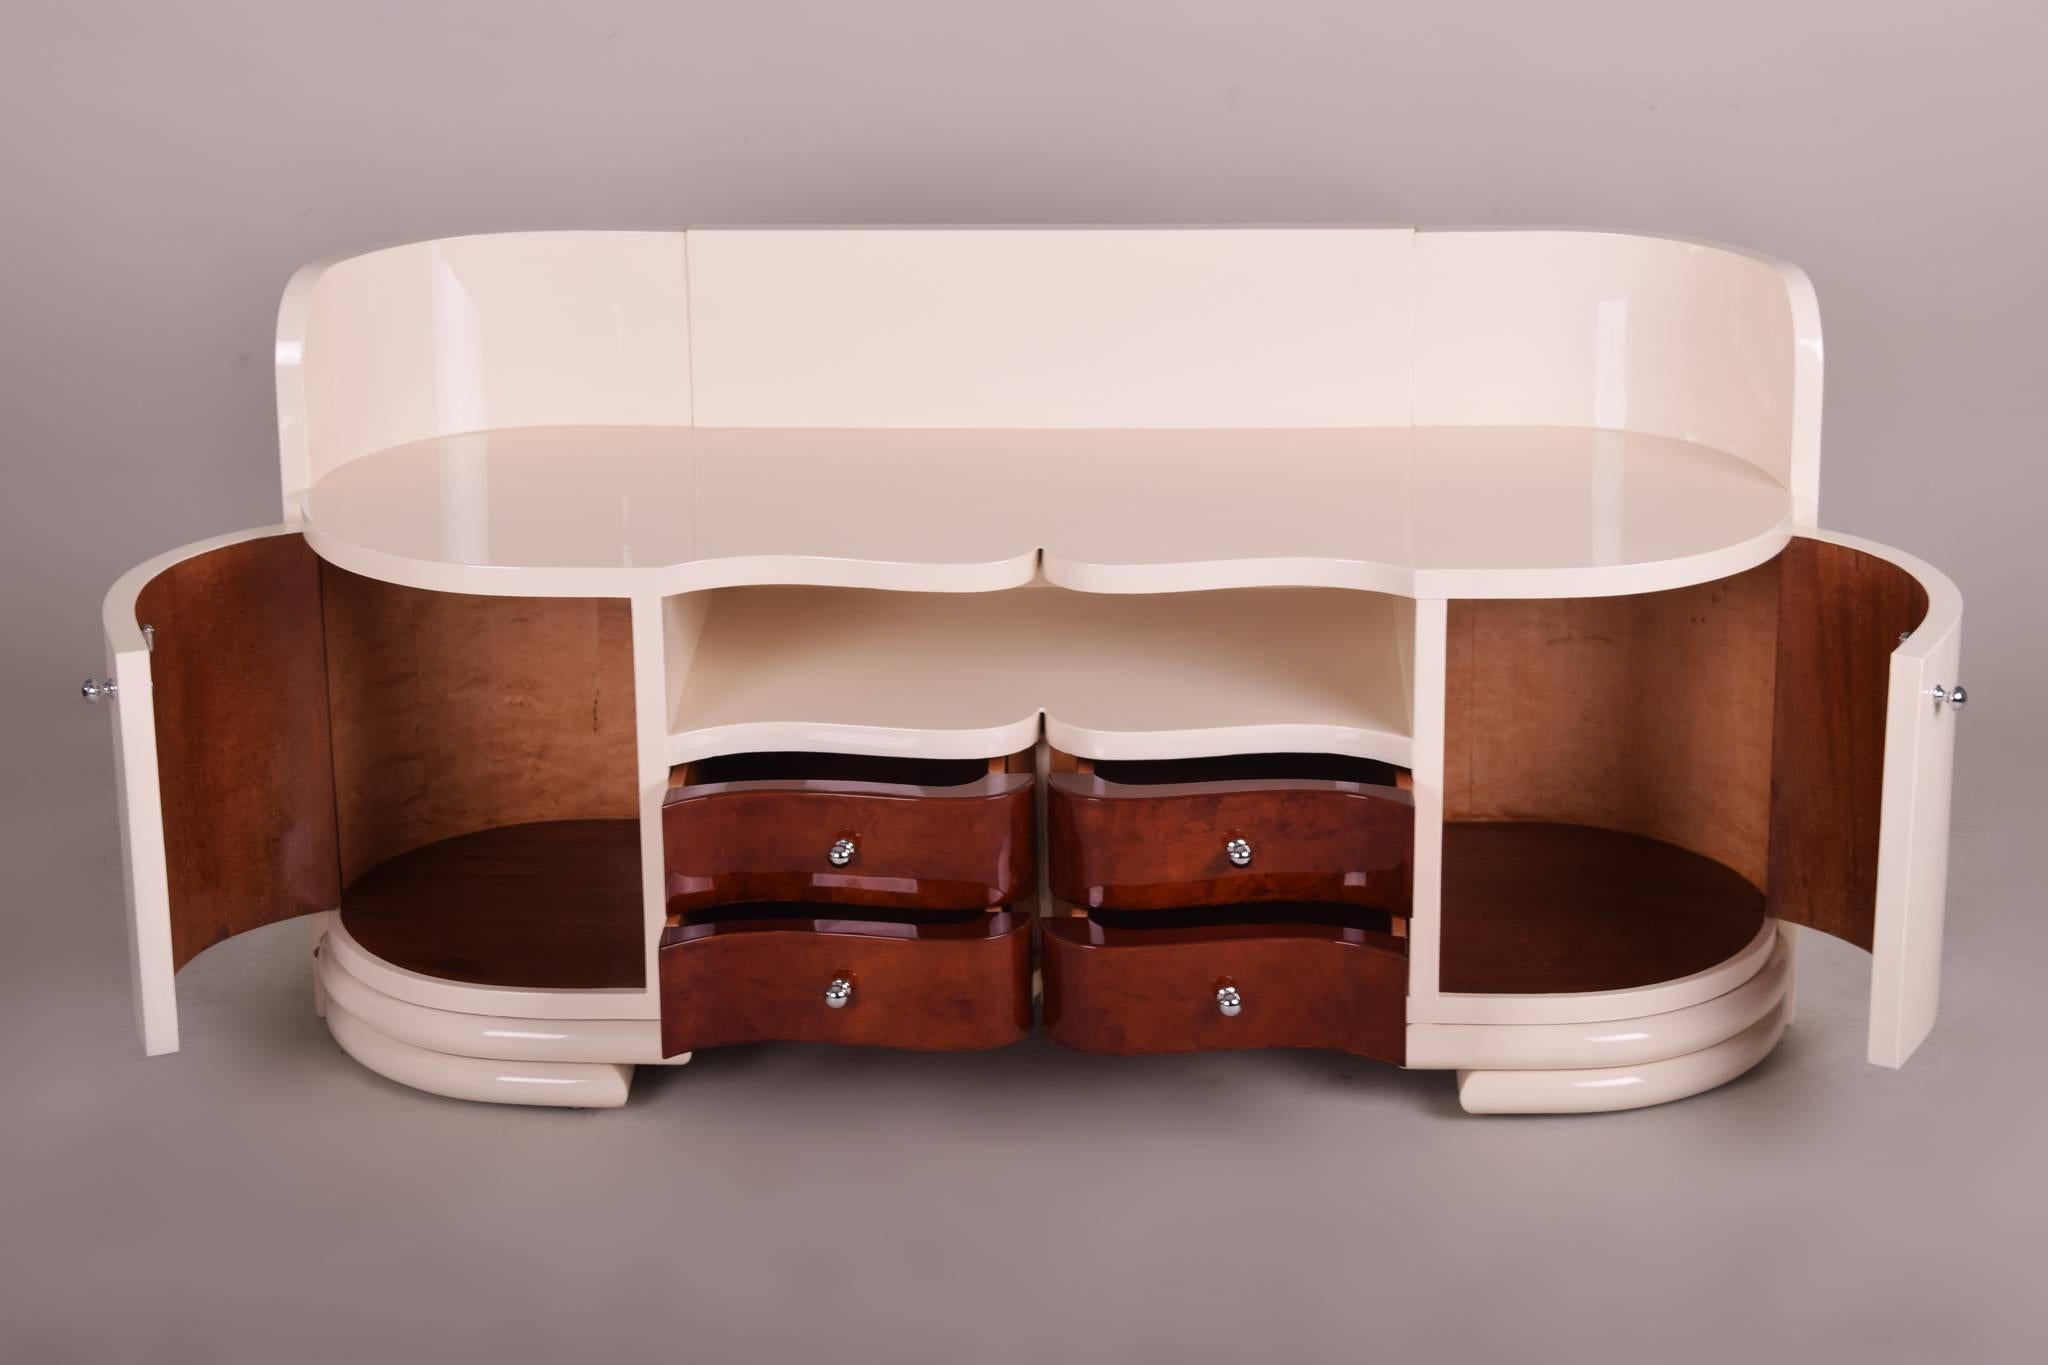 Low Art Deco dressing commode from Czechoslovakia, 1930-1939.
Color ivory.

We guarantee safe a the cheapest air transport from Europe to the whole world within 7 days.
The price is the same as for ship transport but delivery time is really